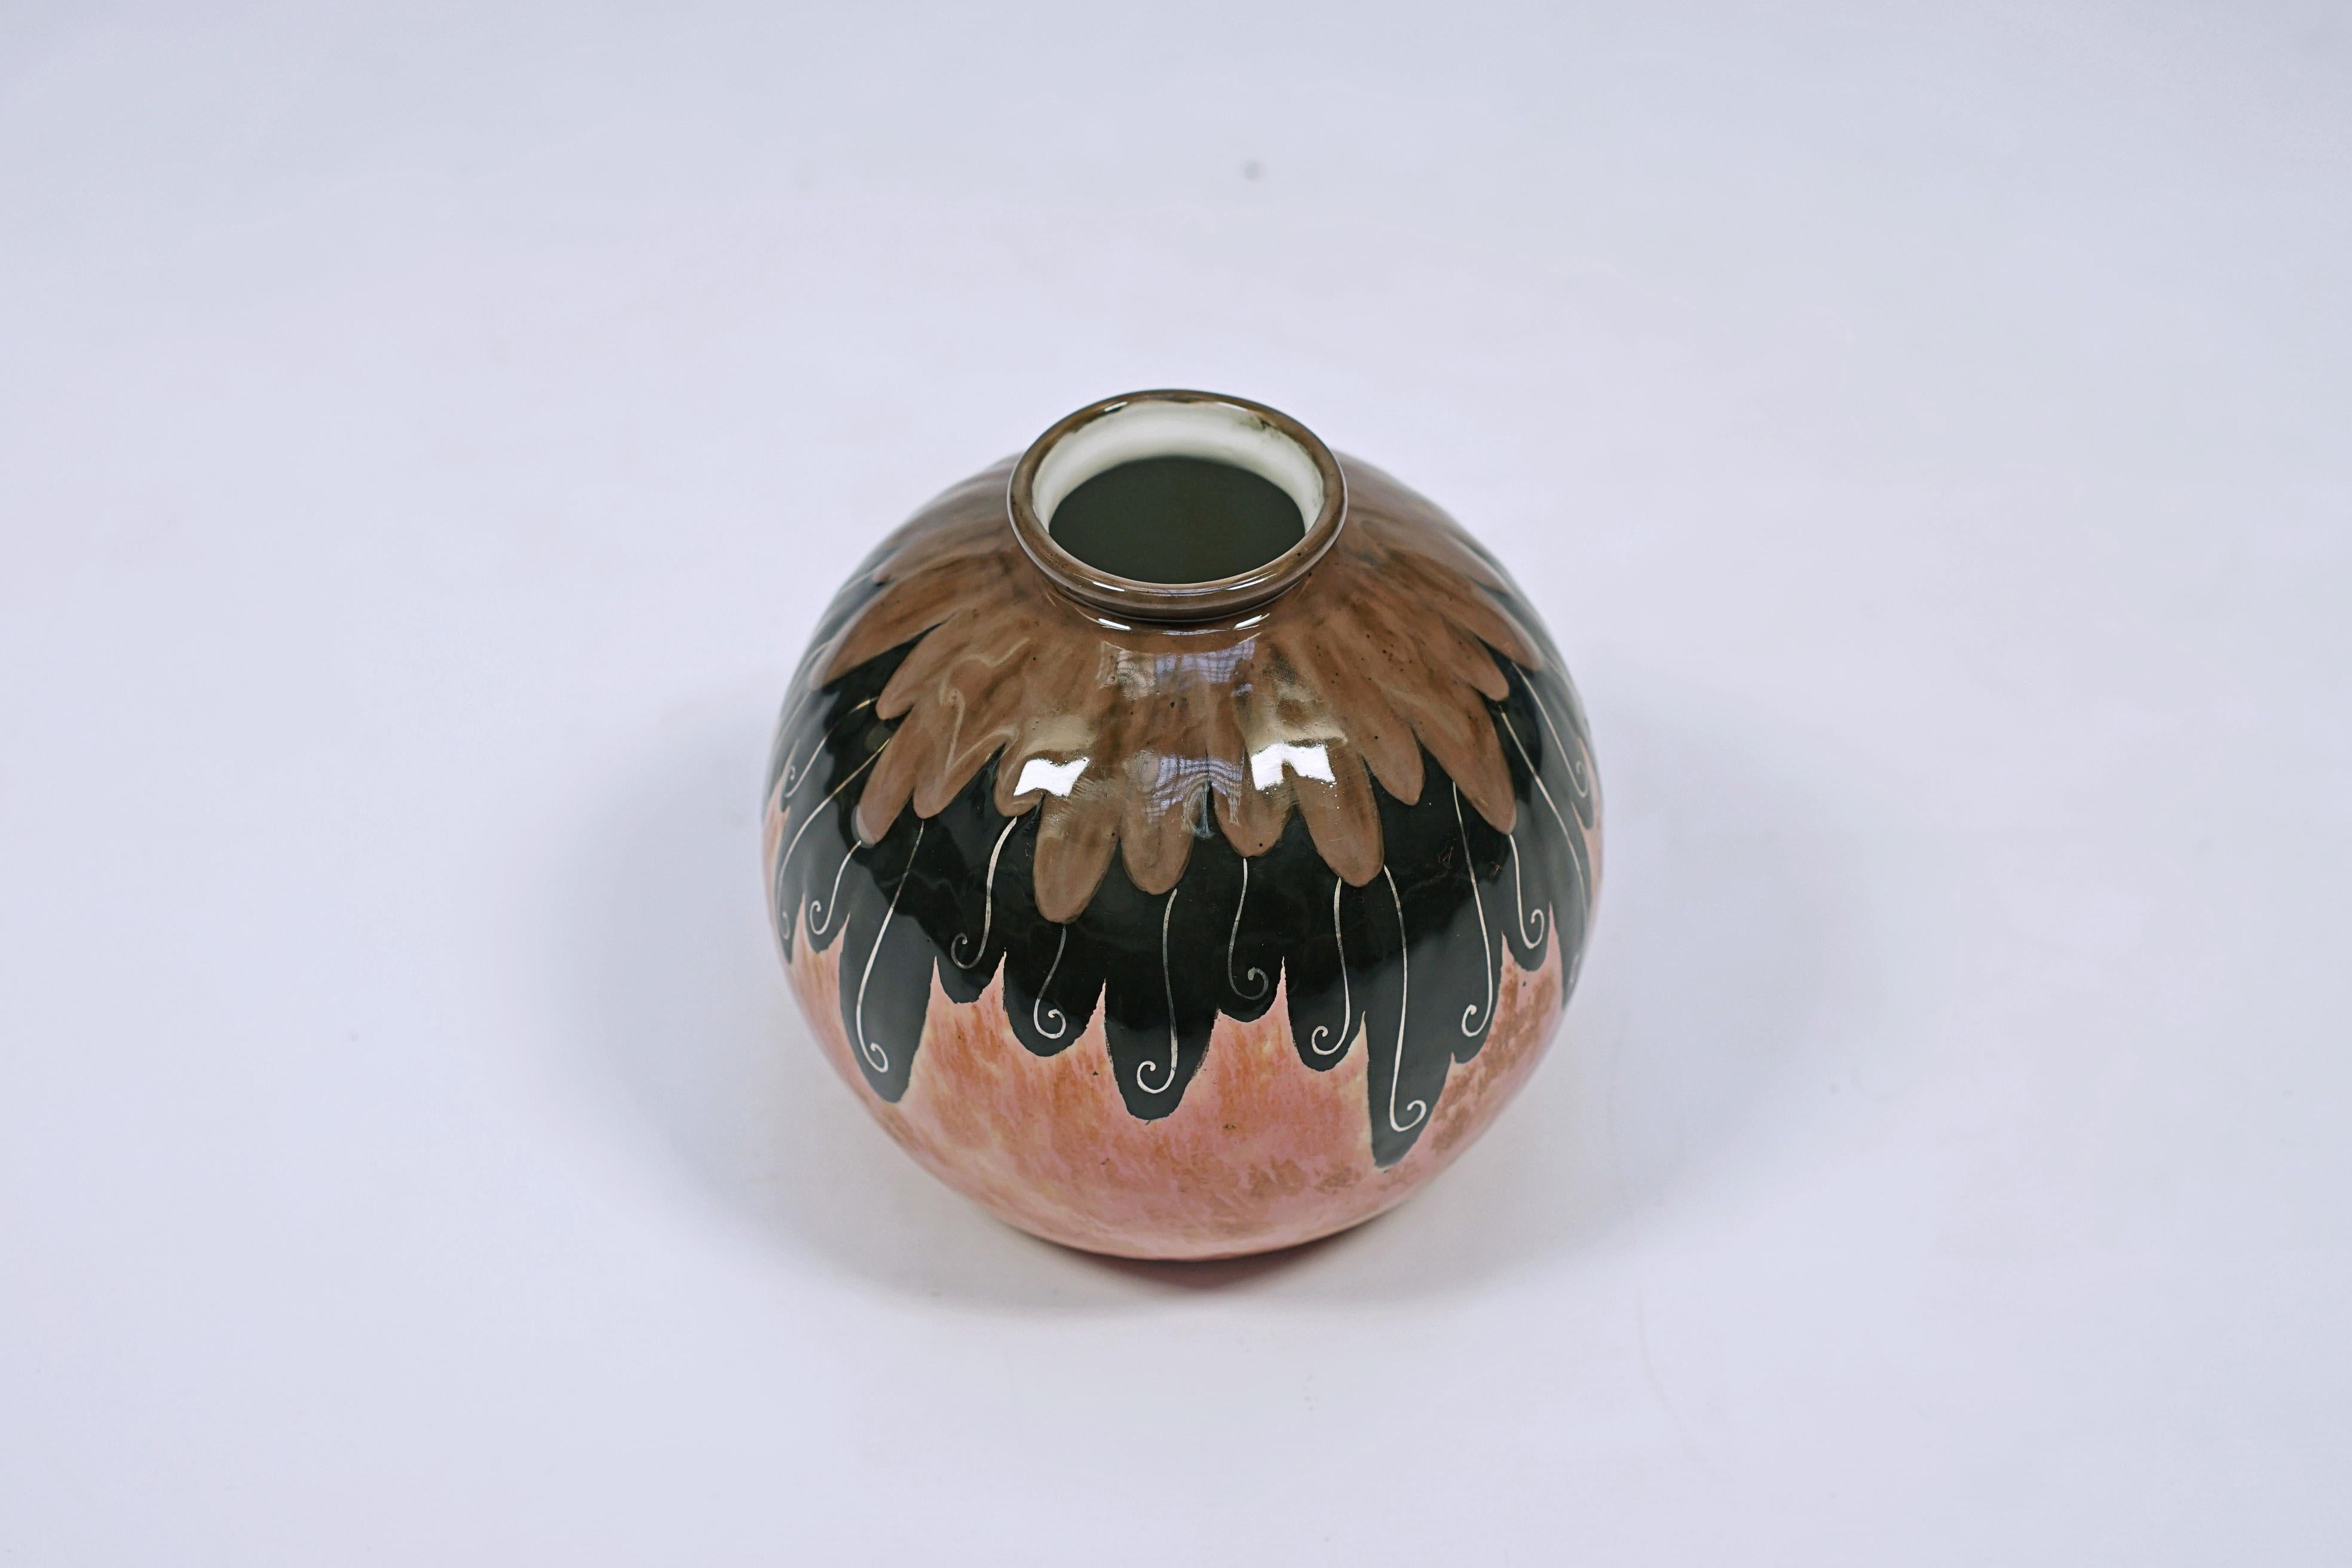 Enamelled porcelain vase with a design of circular brushstrokes and arabesque details. Designed by THARAUD Camille (1878-1956), made by Limoges. Signed Limoges, France, C THARAUD.

France, CIRCA 1940.